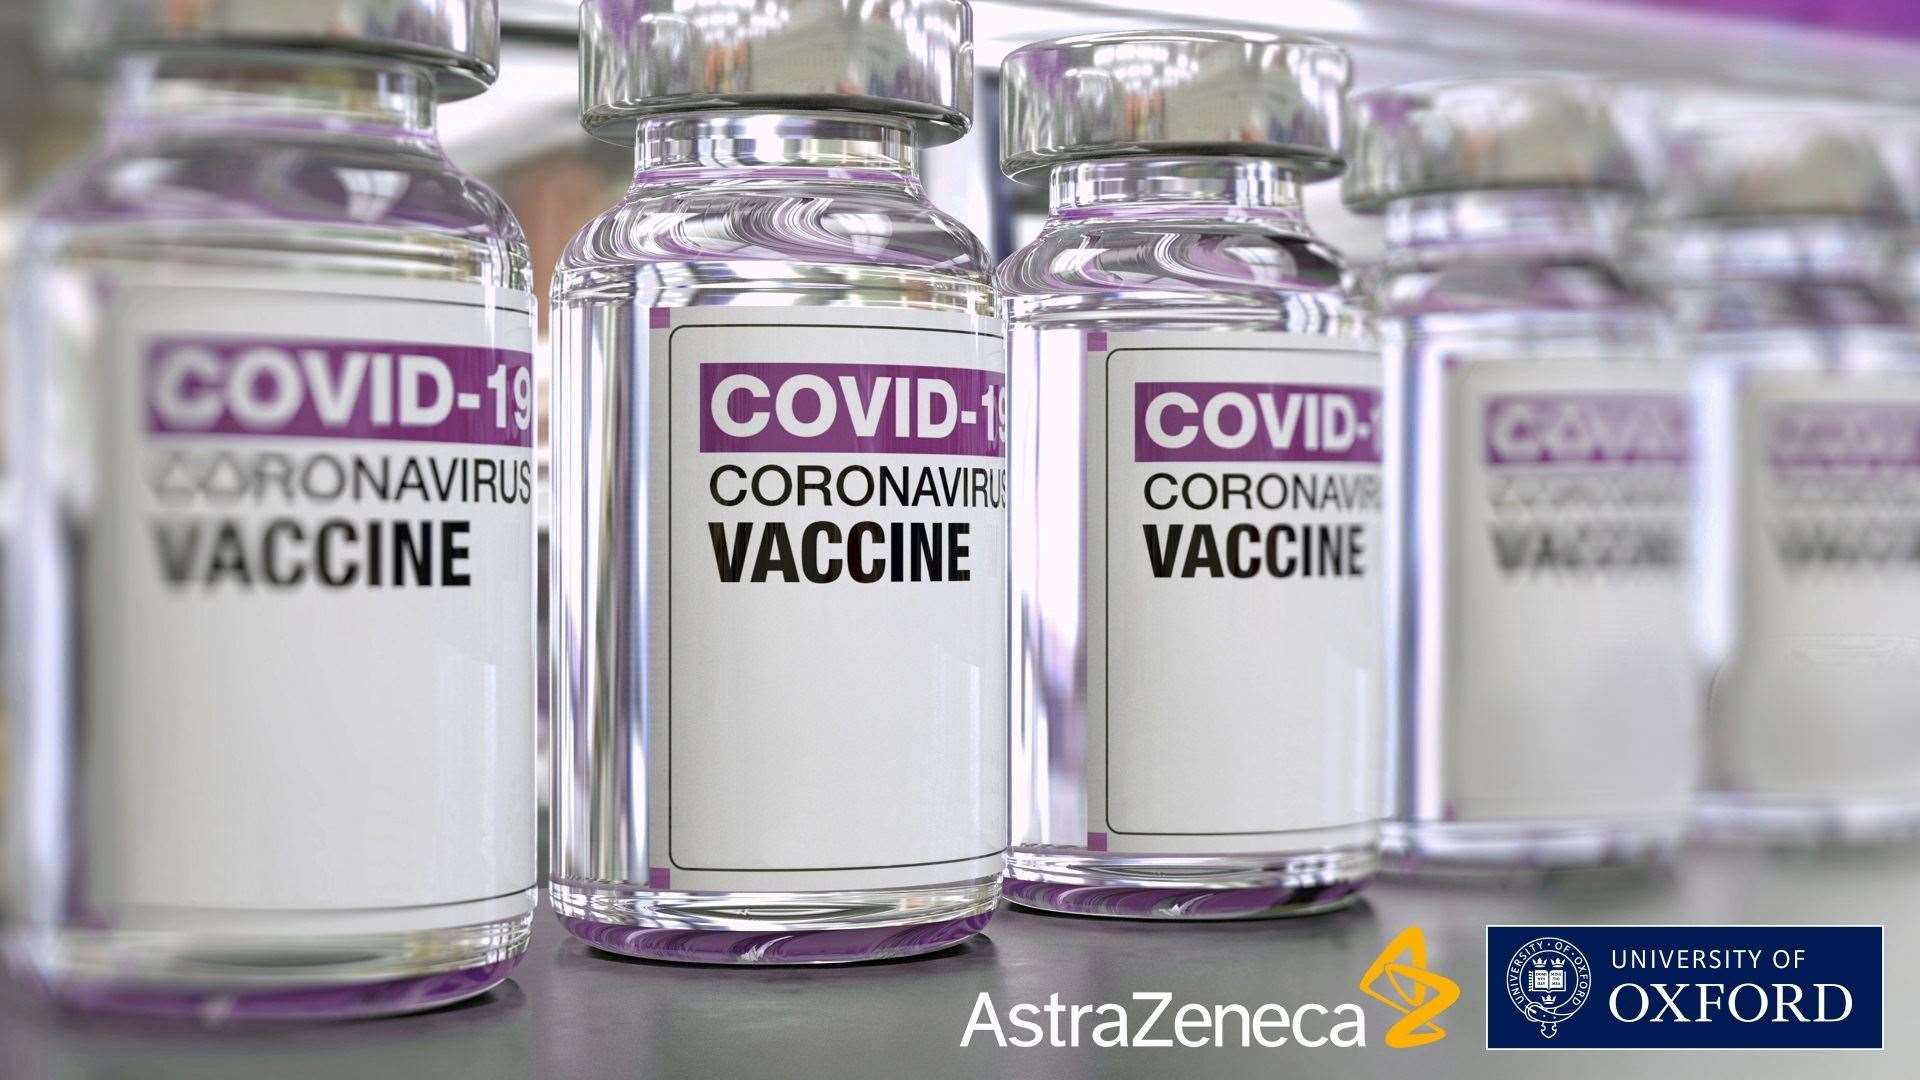 Vials of the AstraZeneca vaccine are being distributed in parts of Medway